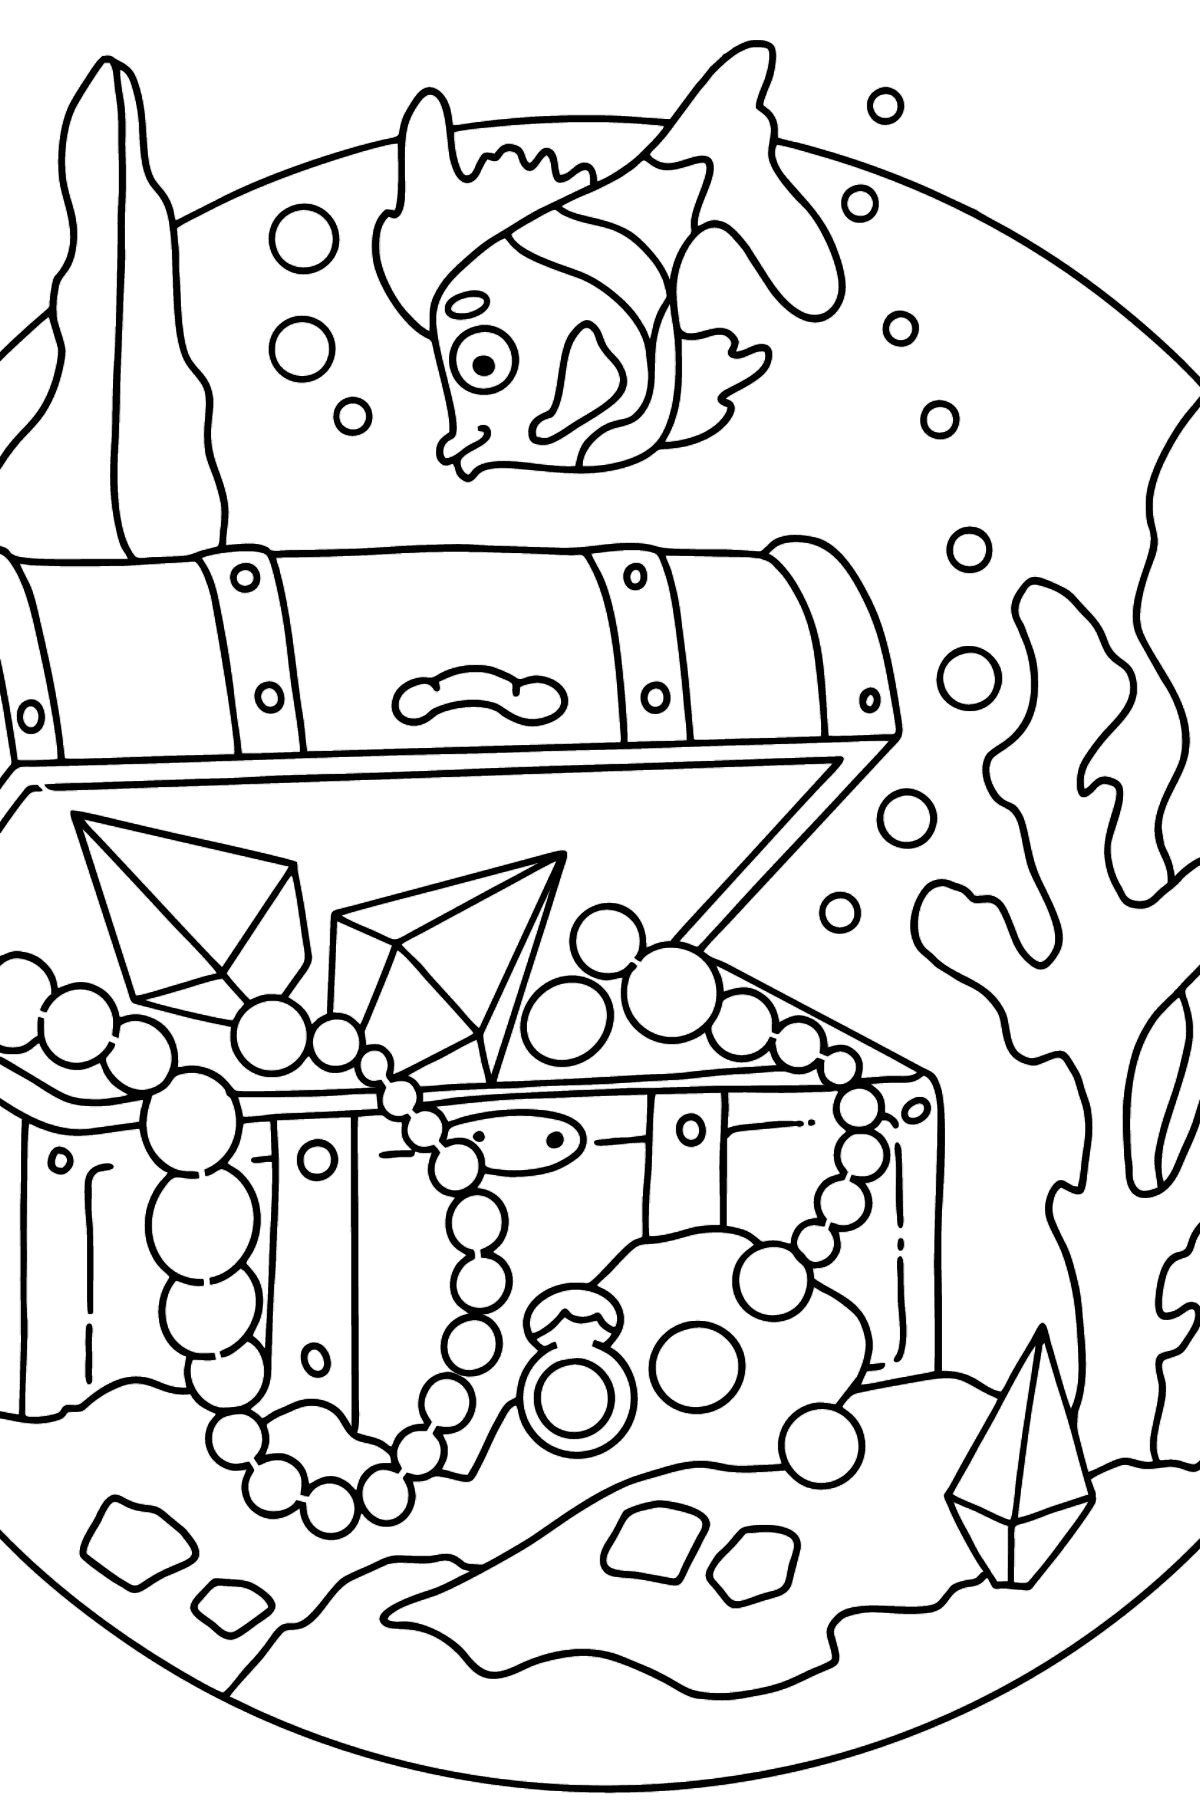 Coloring Page - A Fish is Swimming Around a Pirate's Chest - Coloring Pages for Kids